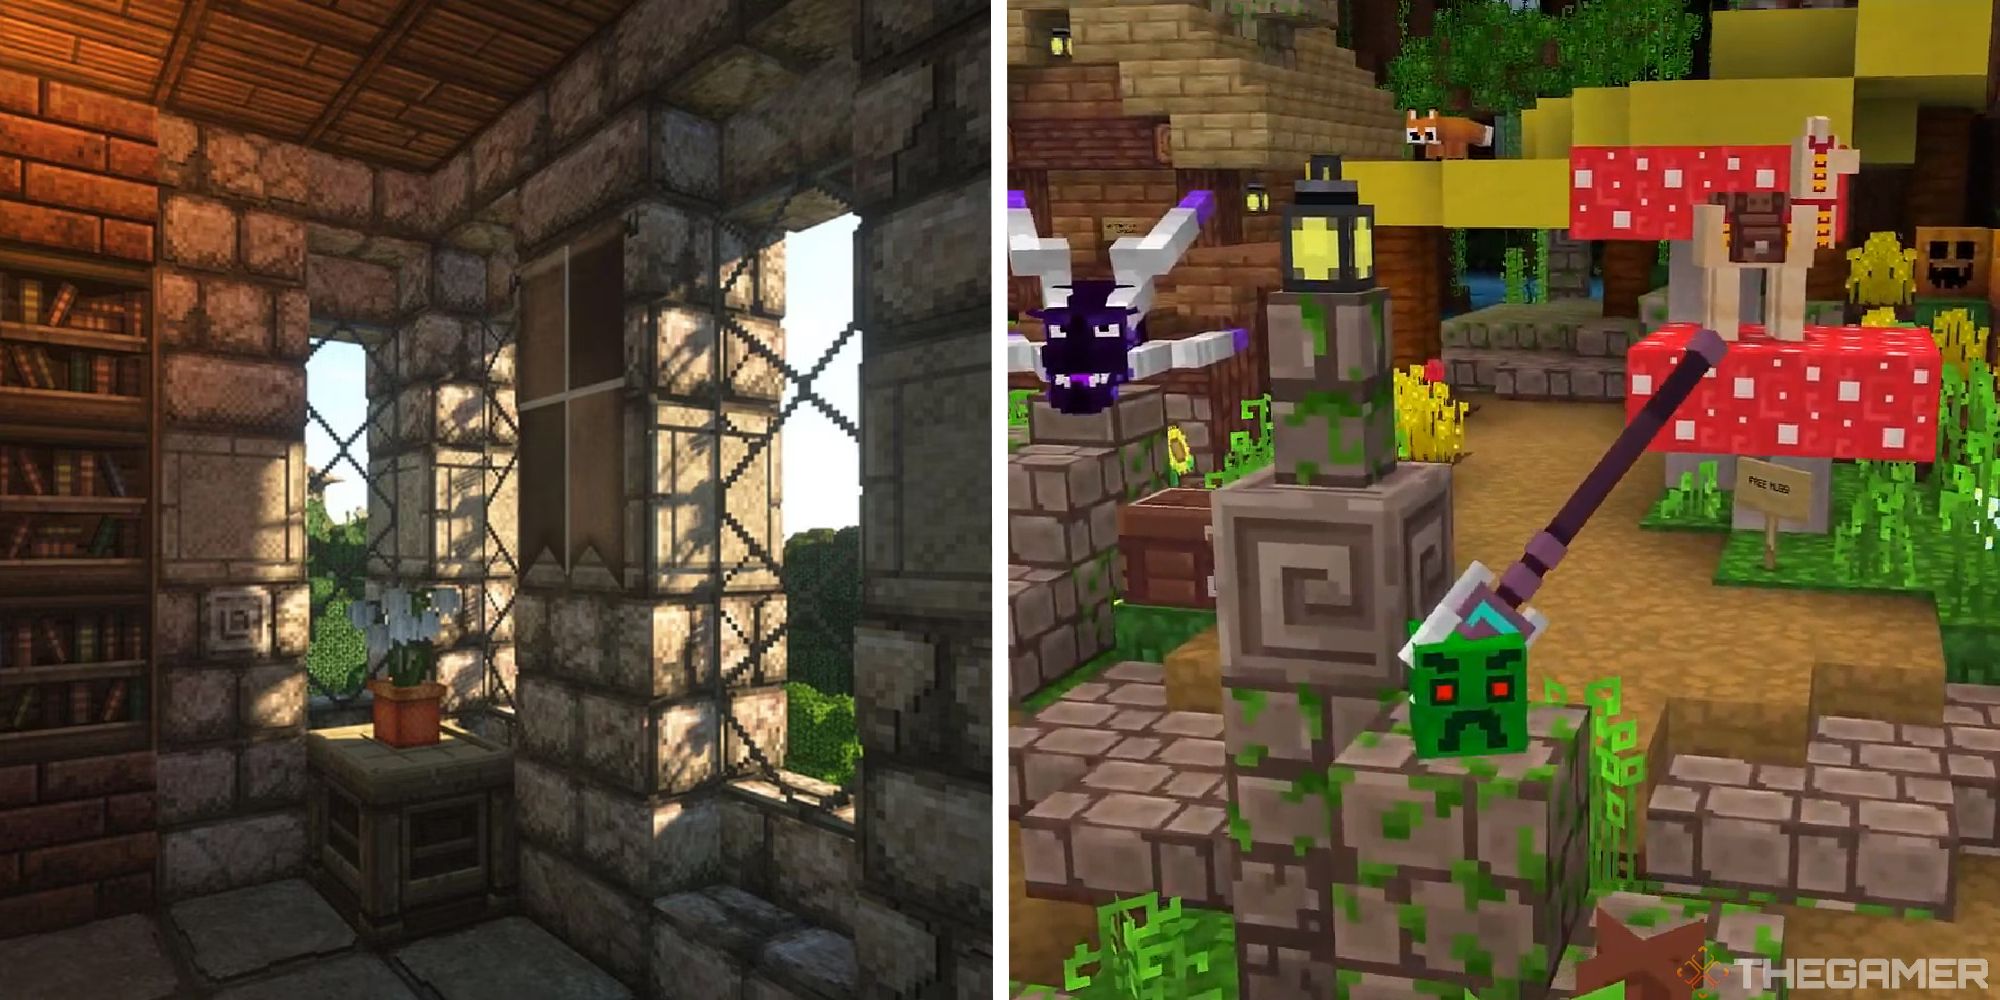 split image showing texture packs, with john smith legacy and twisty